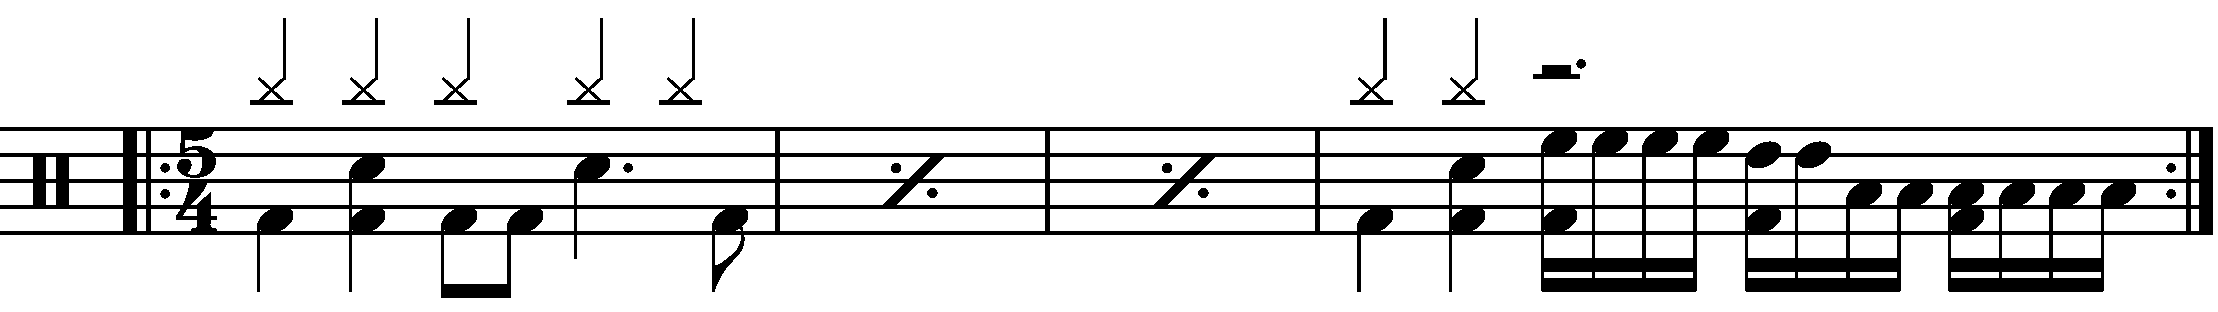 A four bar phrase using sixteenth note fills in 5/4.